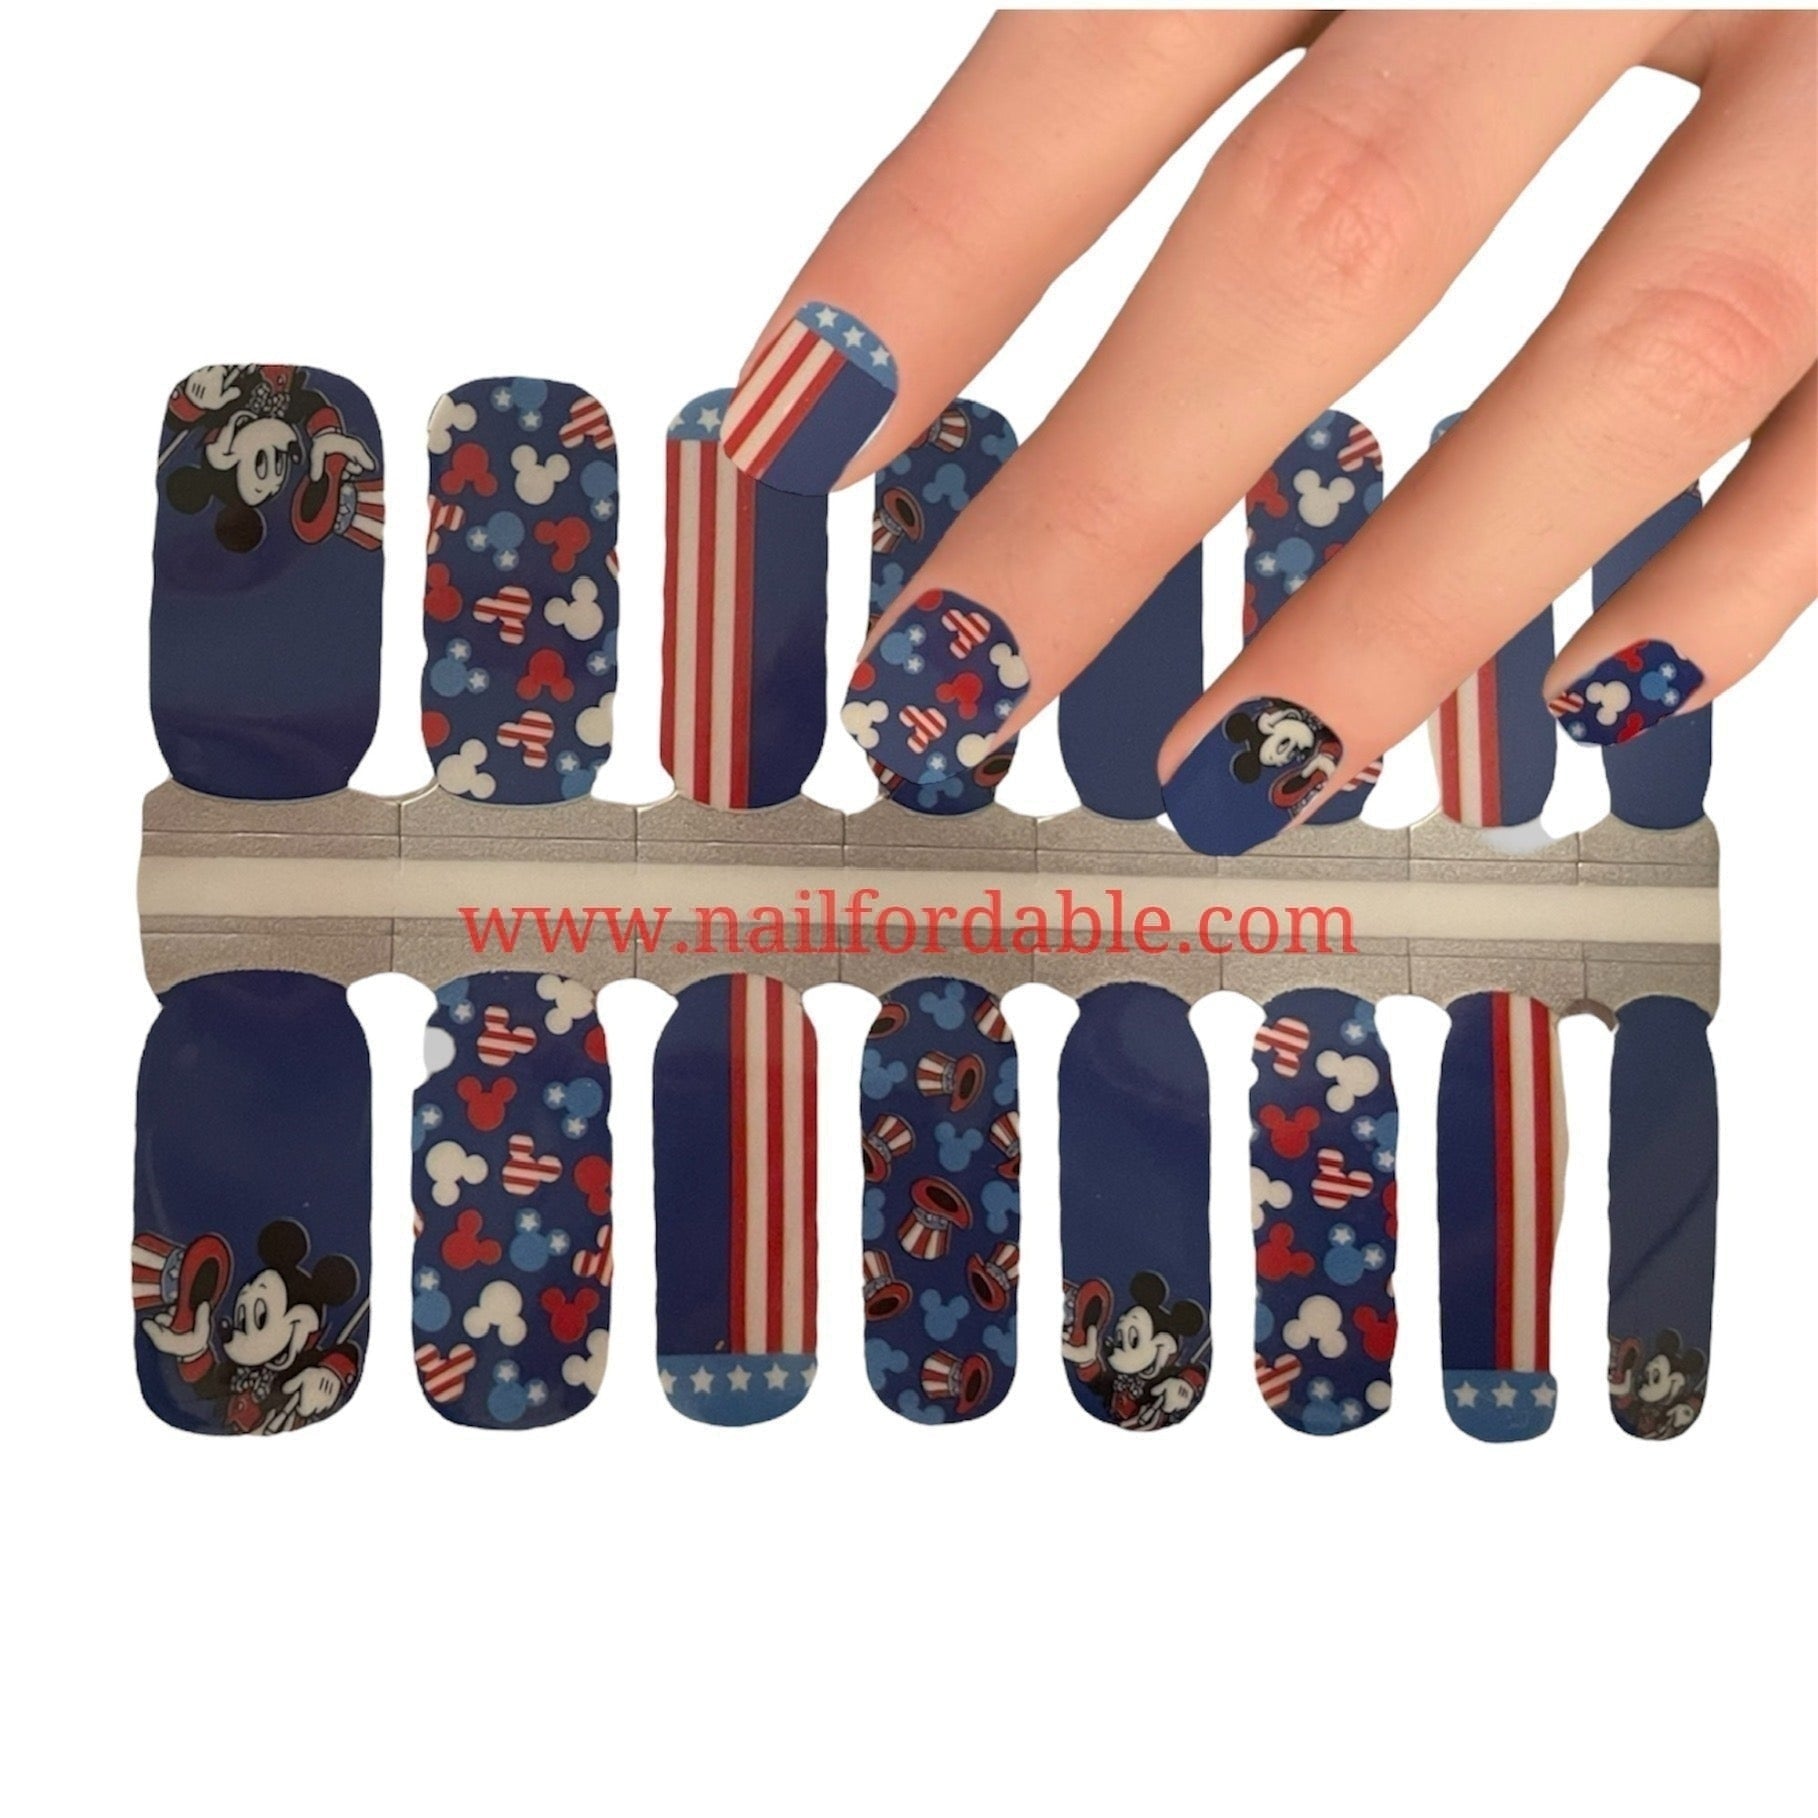 Festive Mickey Mouse Nail Wraps | Semi Cured Gel Wraps | Gel Nail Wraps |Nail Polish | Nail Stickers